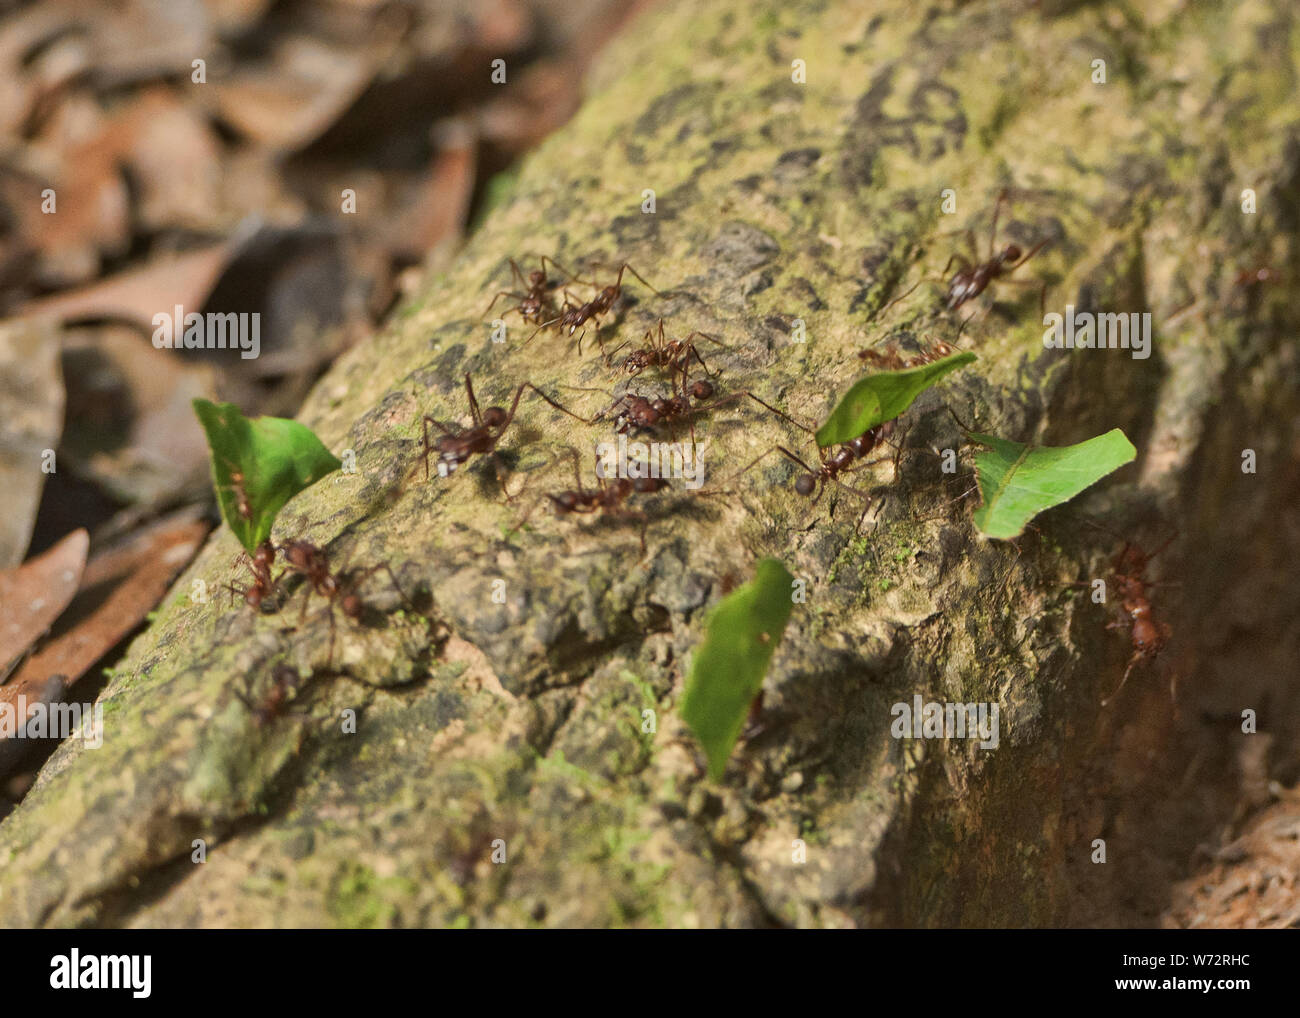 Leafcutter ants (Acromyrmex) at work, Tambopata Reserve, Peruvian Amazon Stock Photo